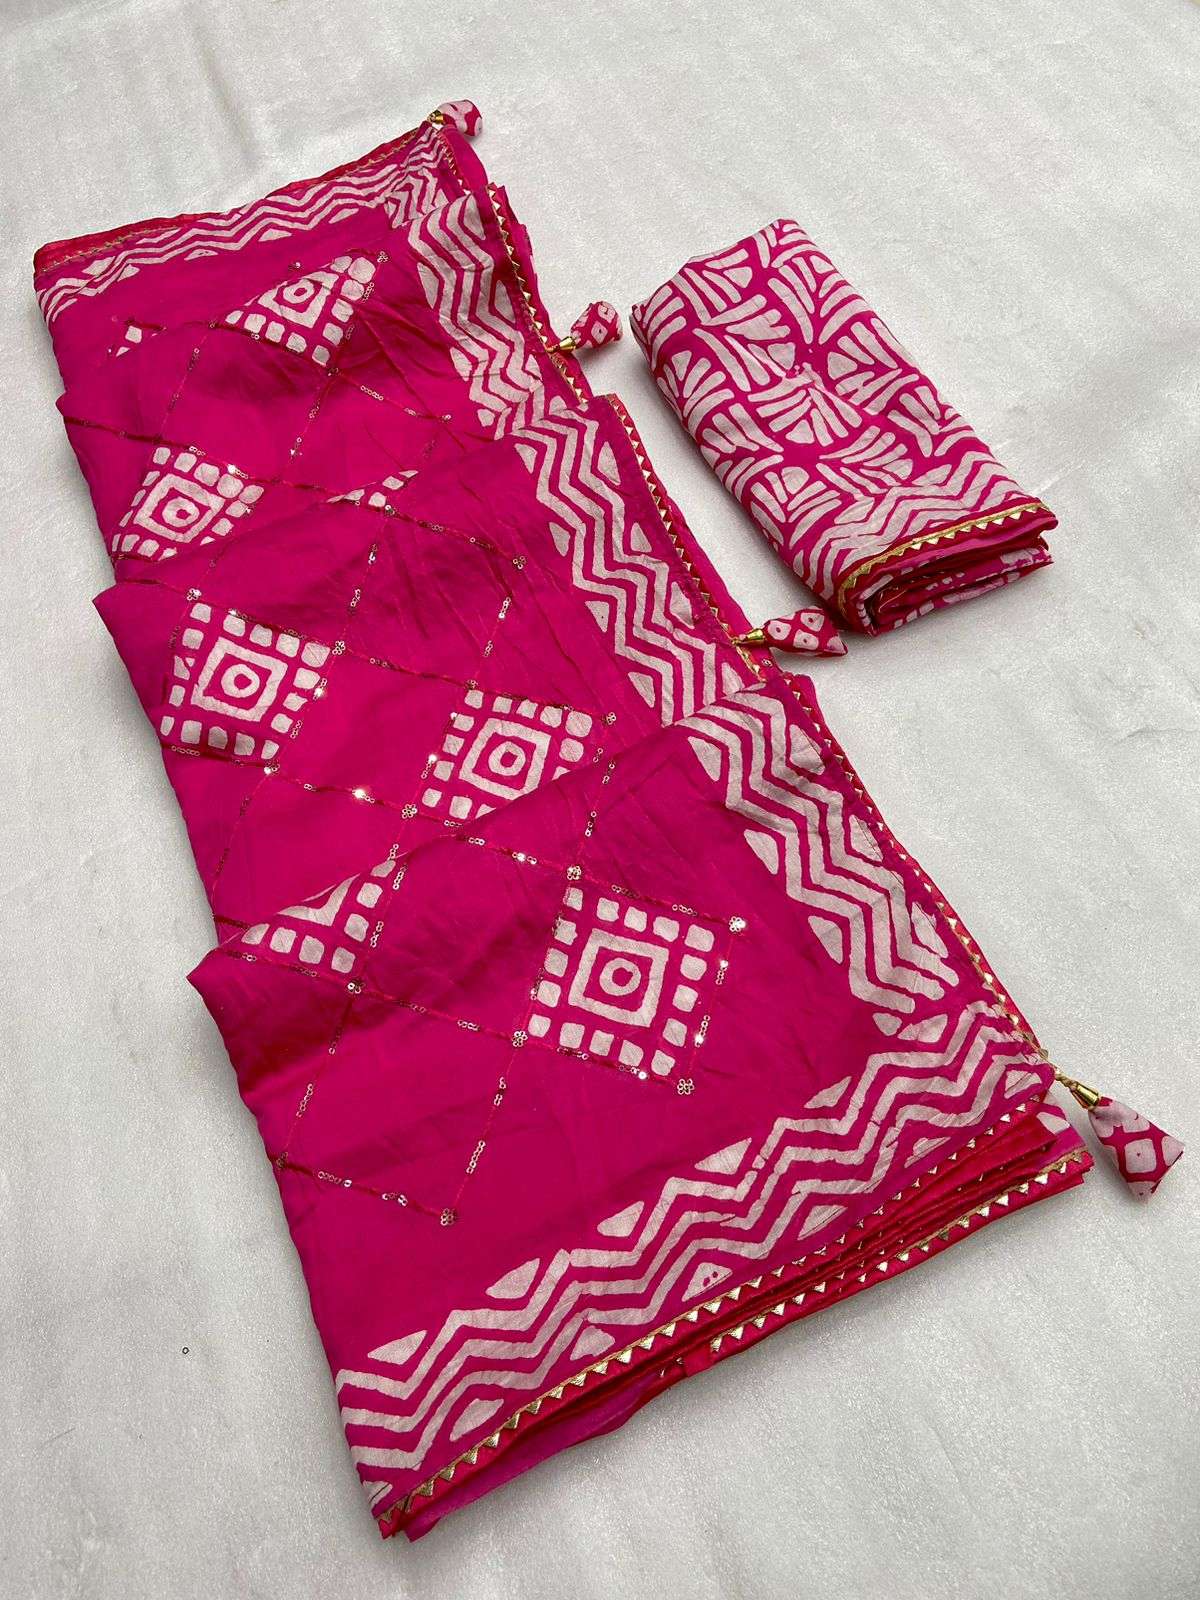 new launch batik print seqance star fabric exclusive latest design in batik print in cotton with seqance butta in all over saree with beautiful eye attractive batik print with gorgeous look latkan nd border 